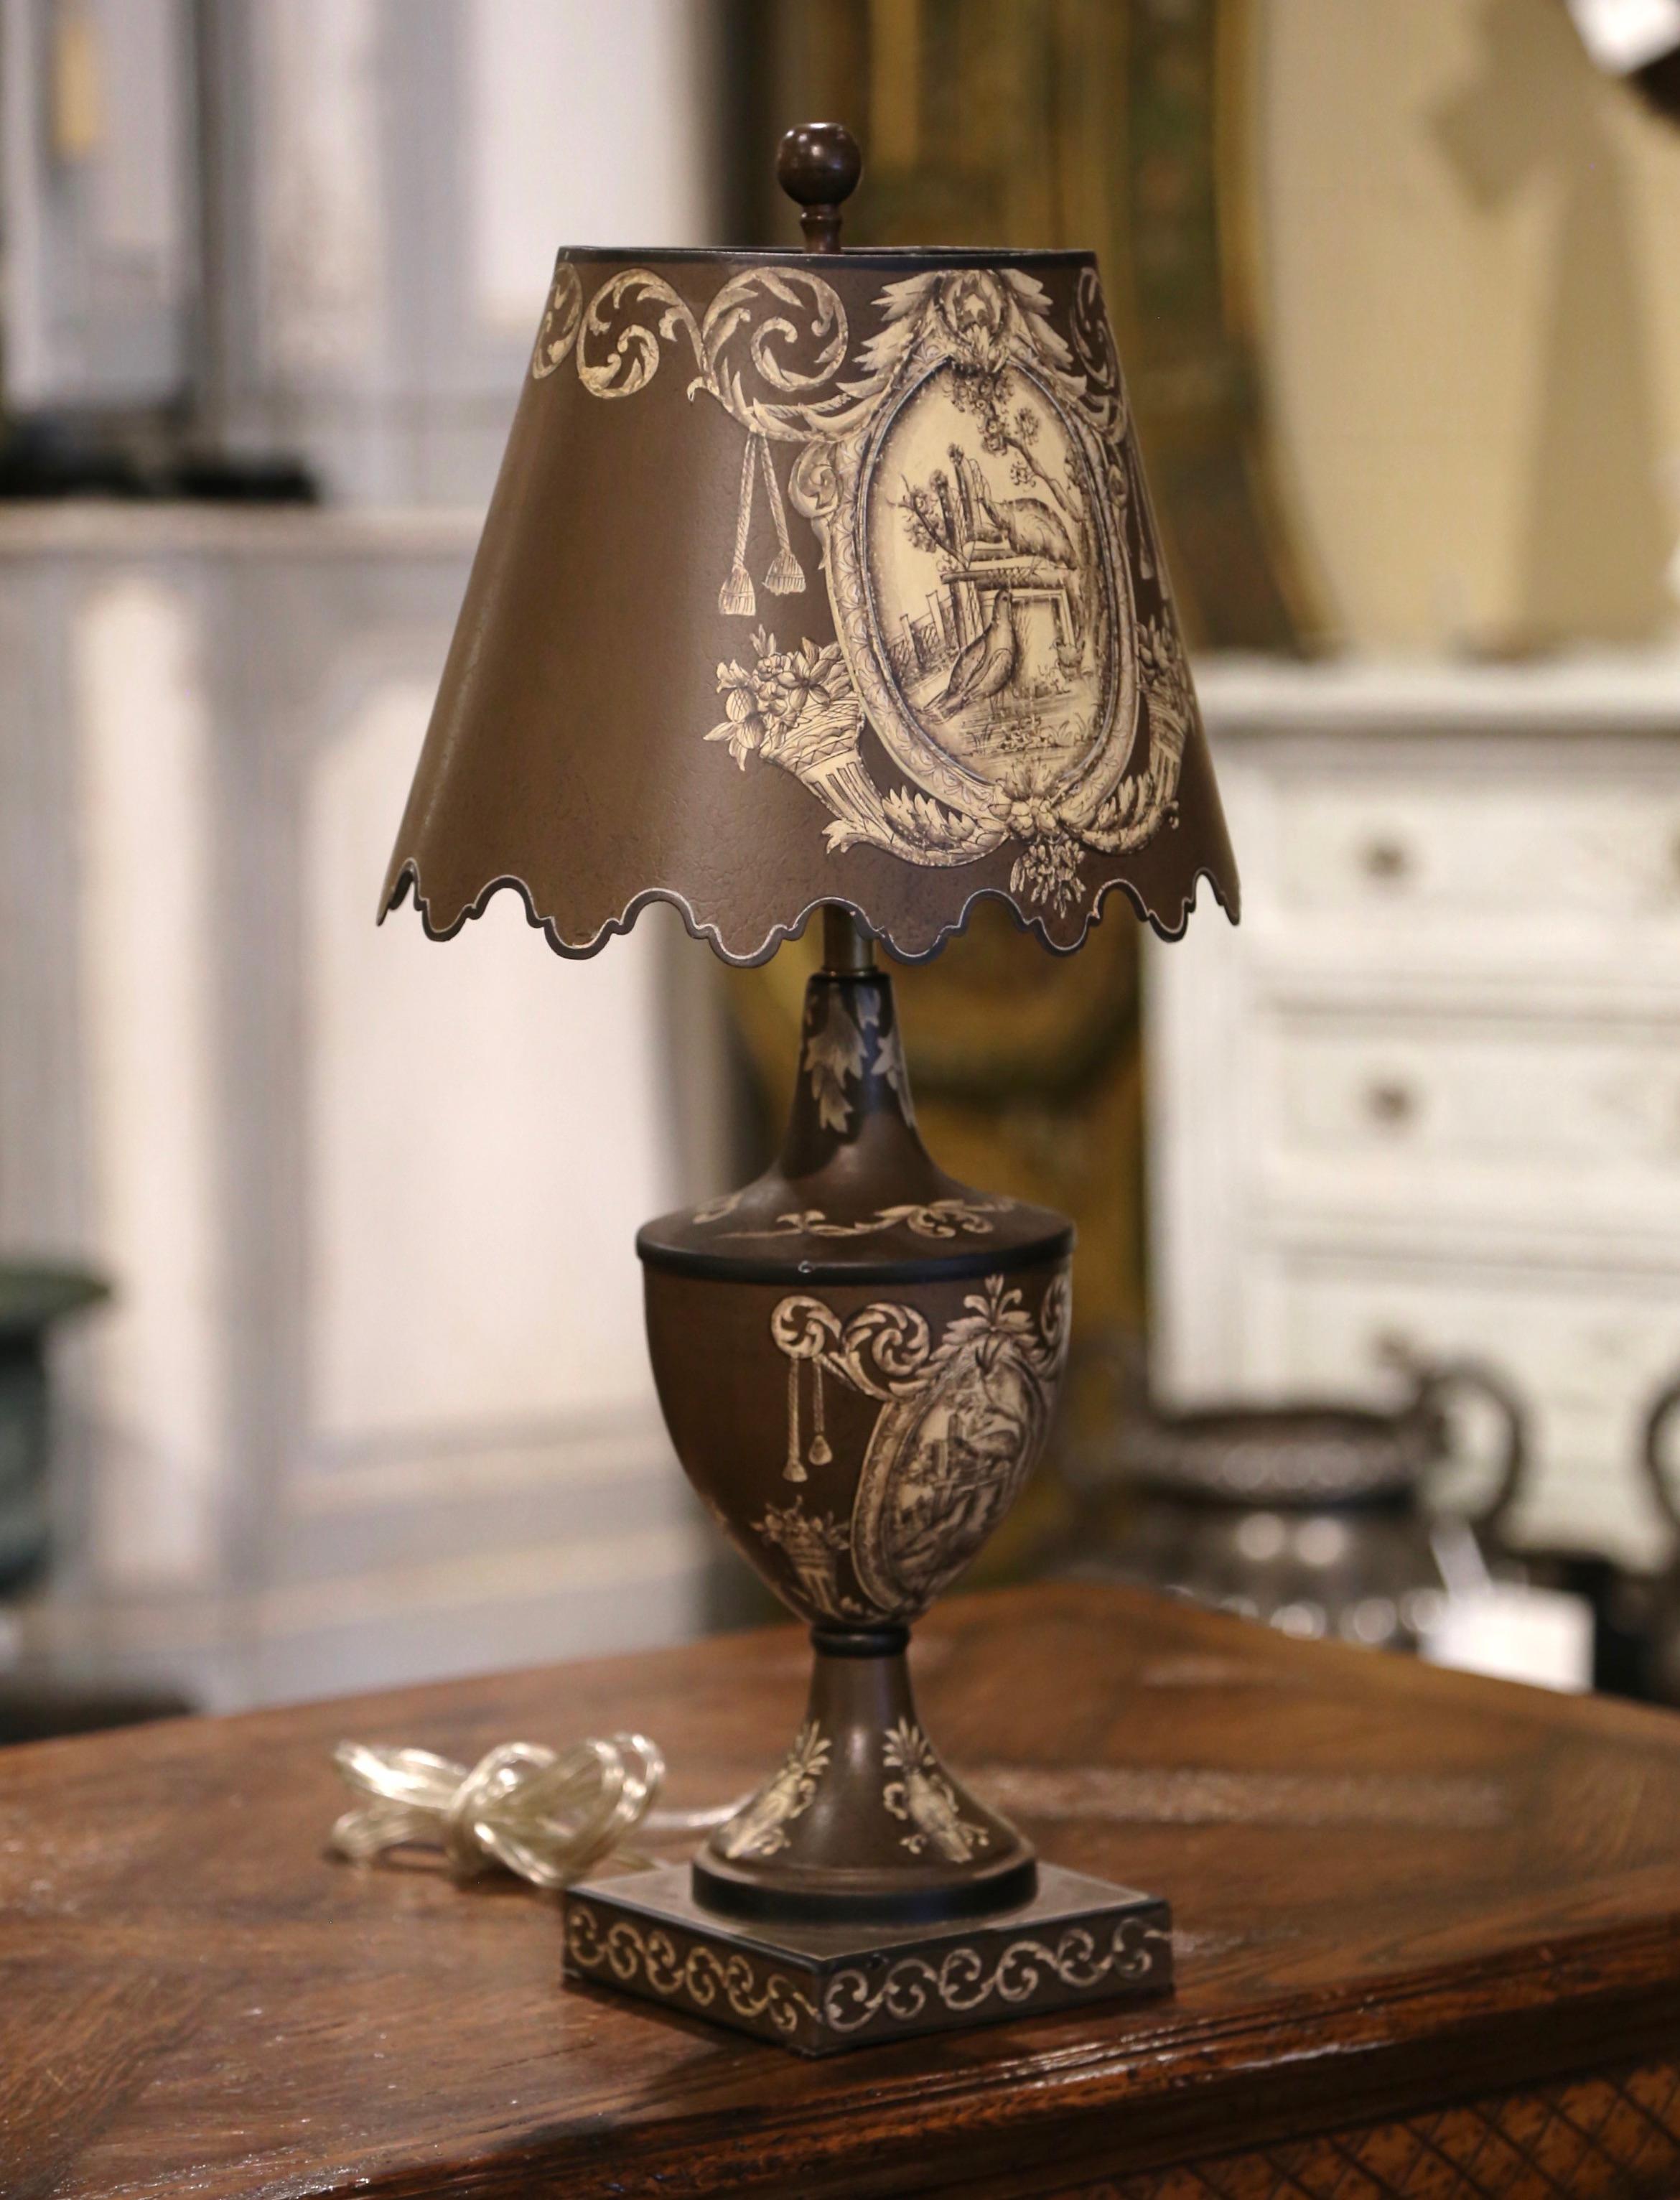 Add an air of drama and elegance to your home with this chocolate-colored tole antique table lamp. Crafted in Italy circa 2000, the delicate brown light-fixture with yellow-gold details stands on a square base decorated with painted vines; the body